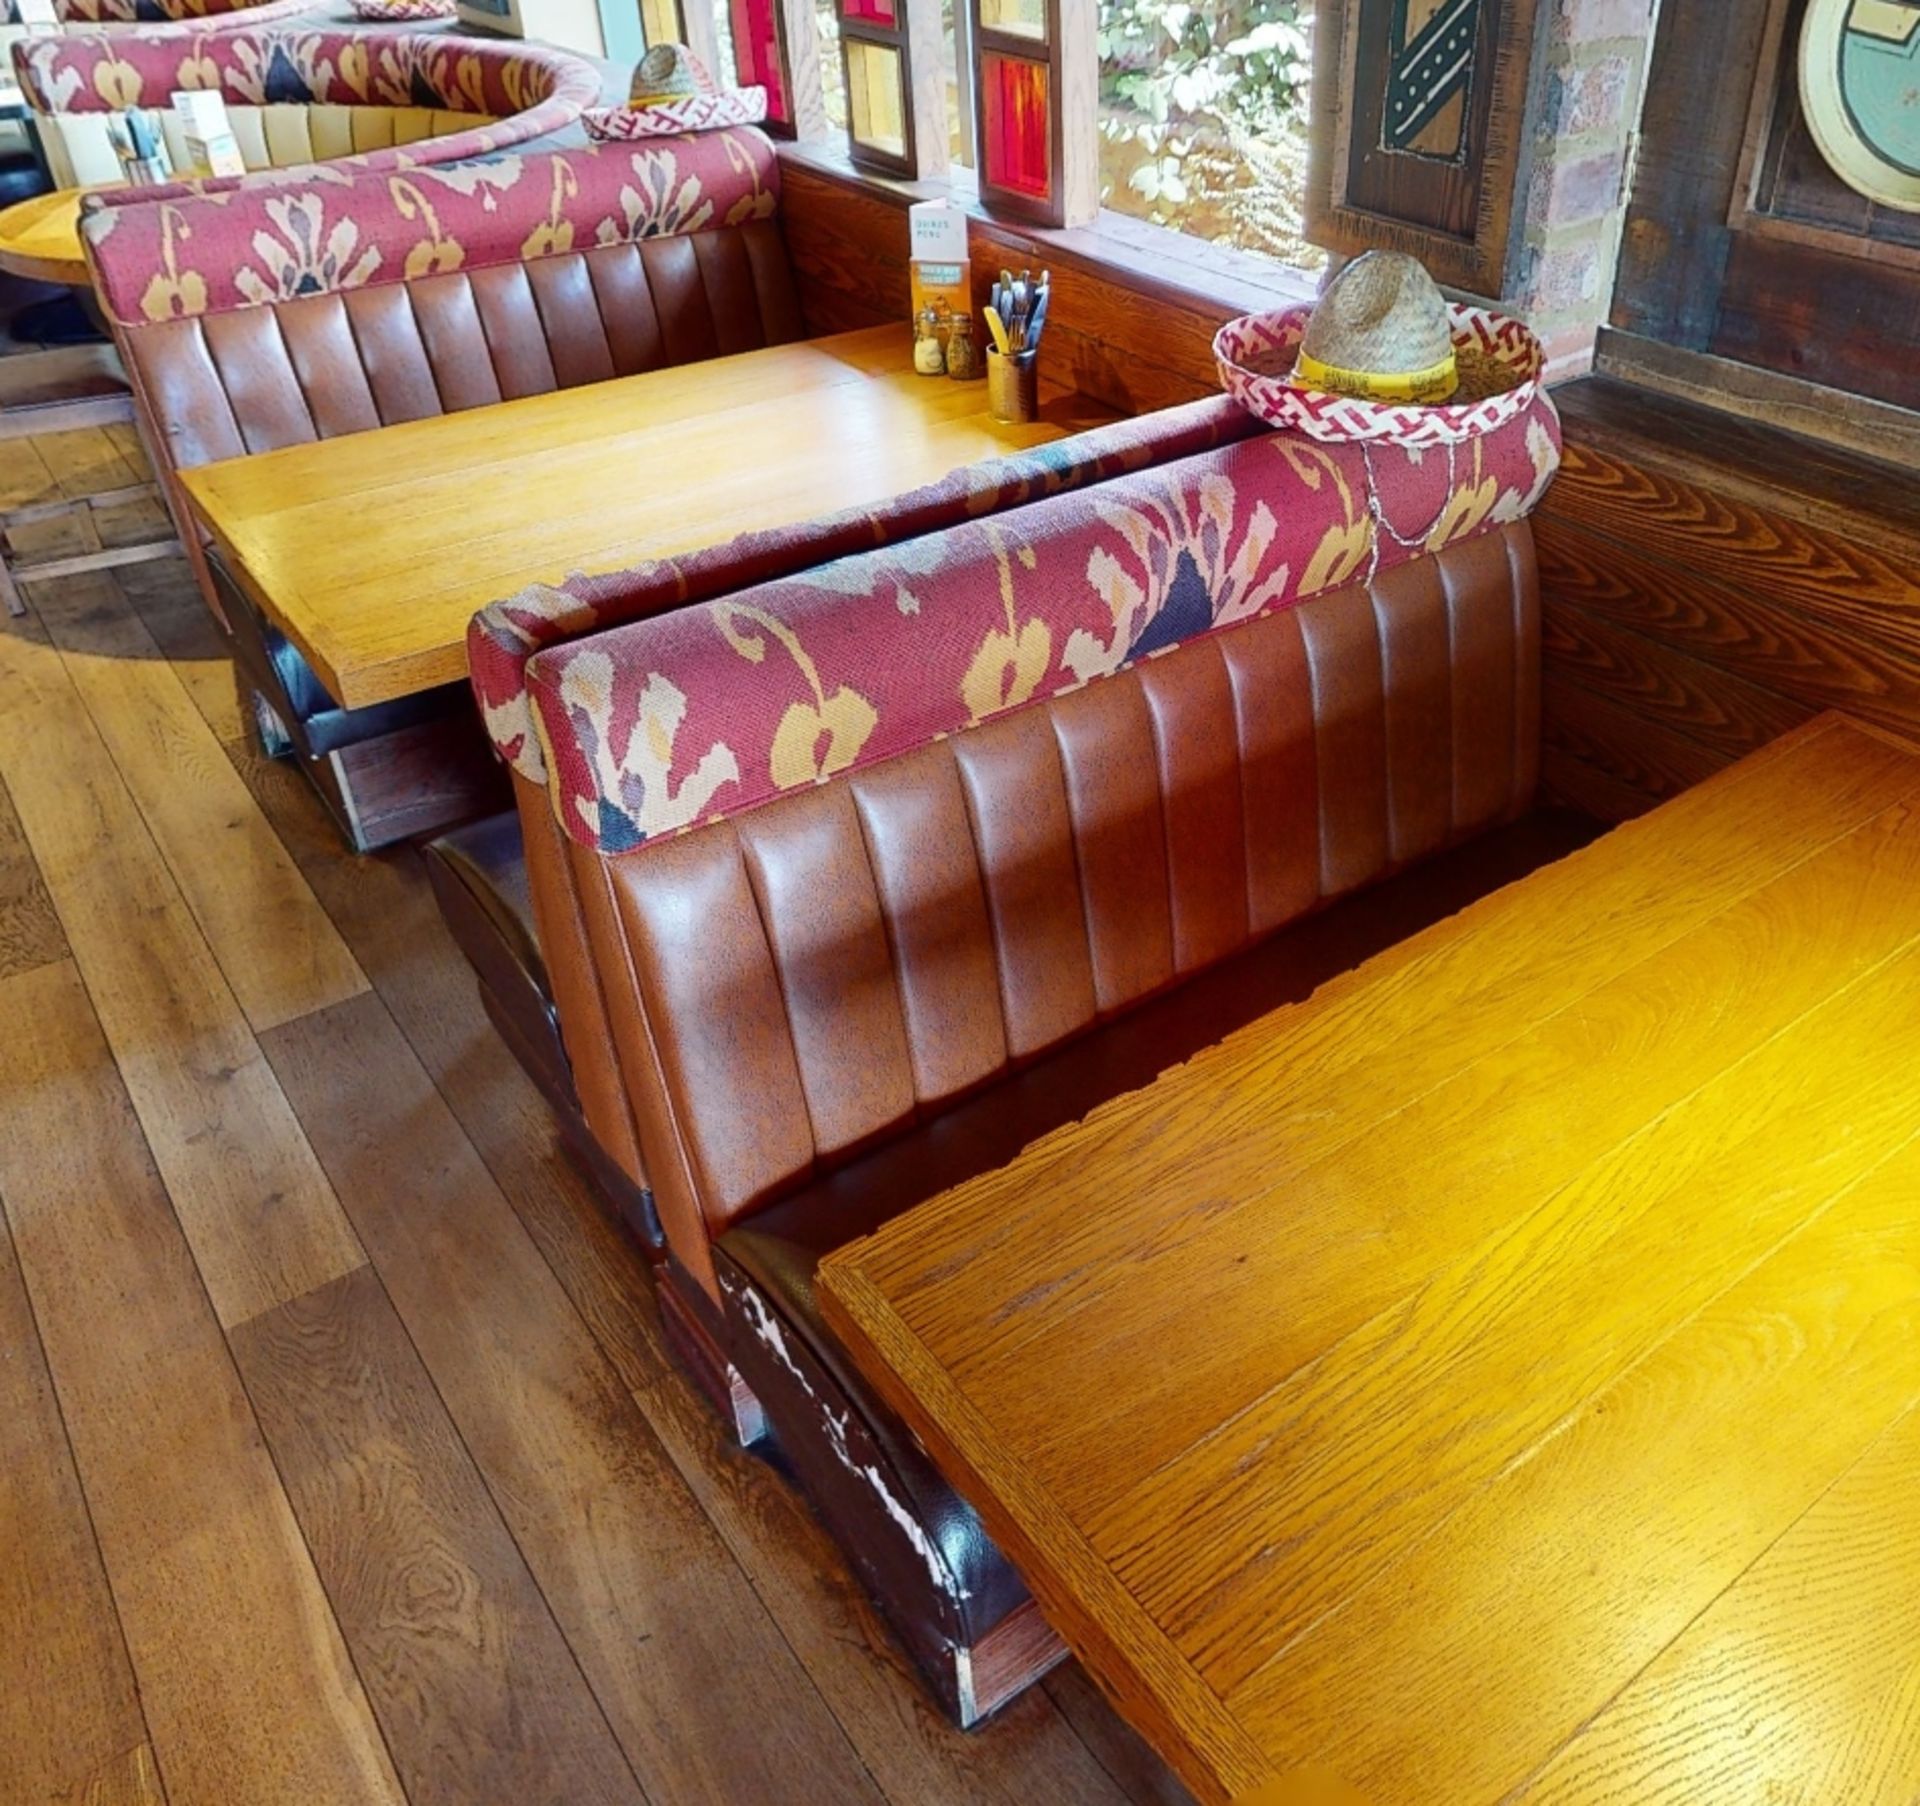 1 x Collection of Restaurant Double Seat Seating Benches - Includes 2 x End Benches and 2 x Back - Image 8 of 8